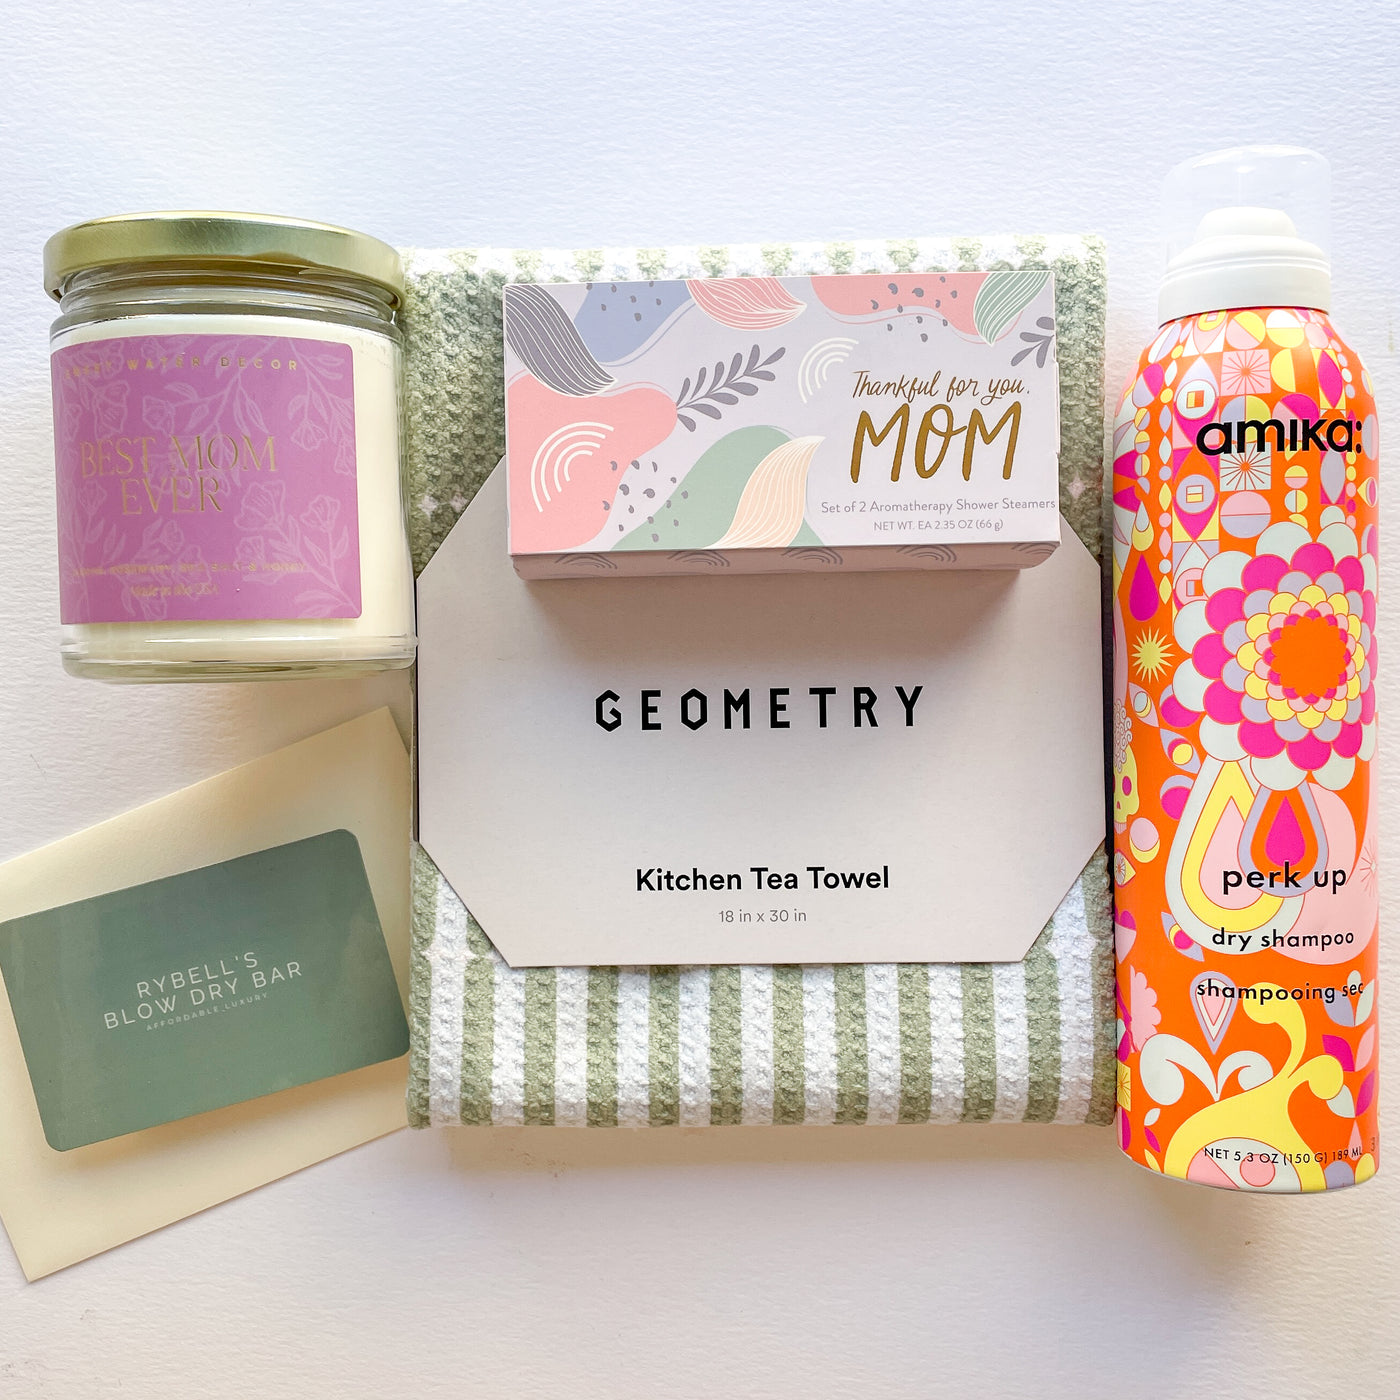 RyBell’s X Greenstar Paperie Luxe Mother's Day Bundle